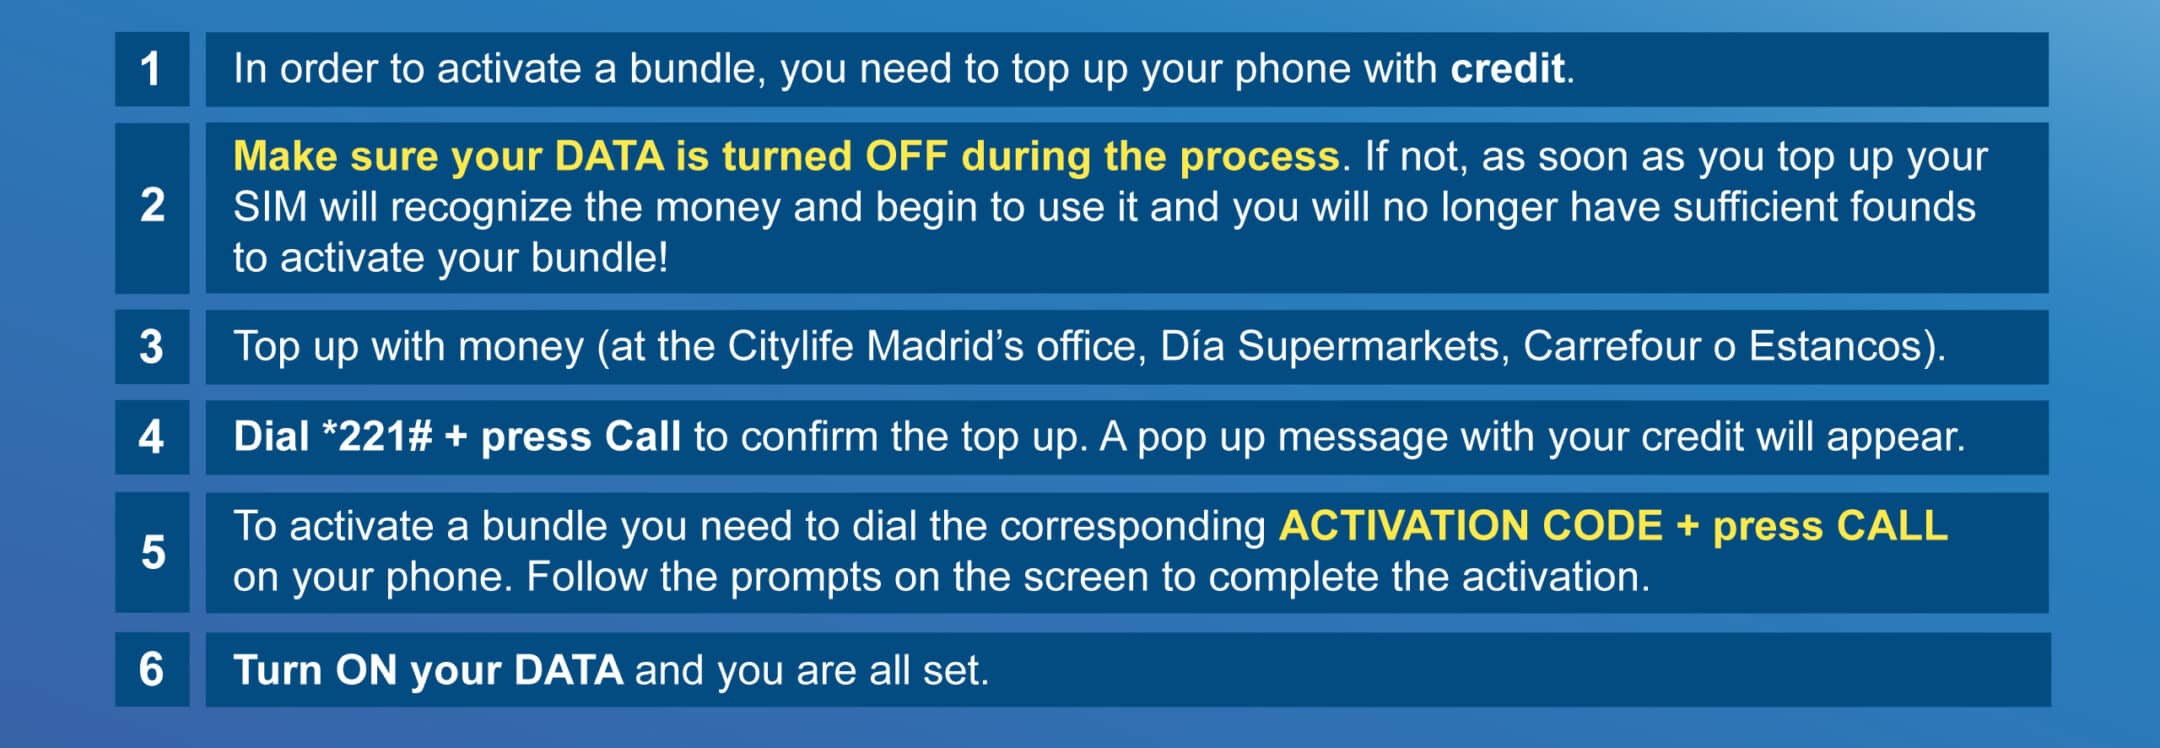 Sodavand bule Føderale Lycamobile - Best Pay as You Go SIM Card for Spain & Europe